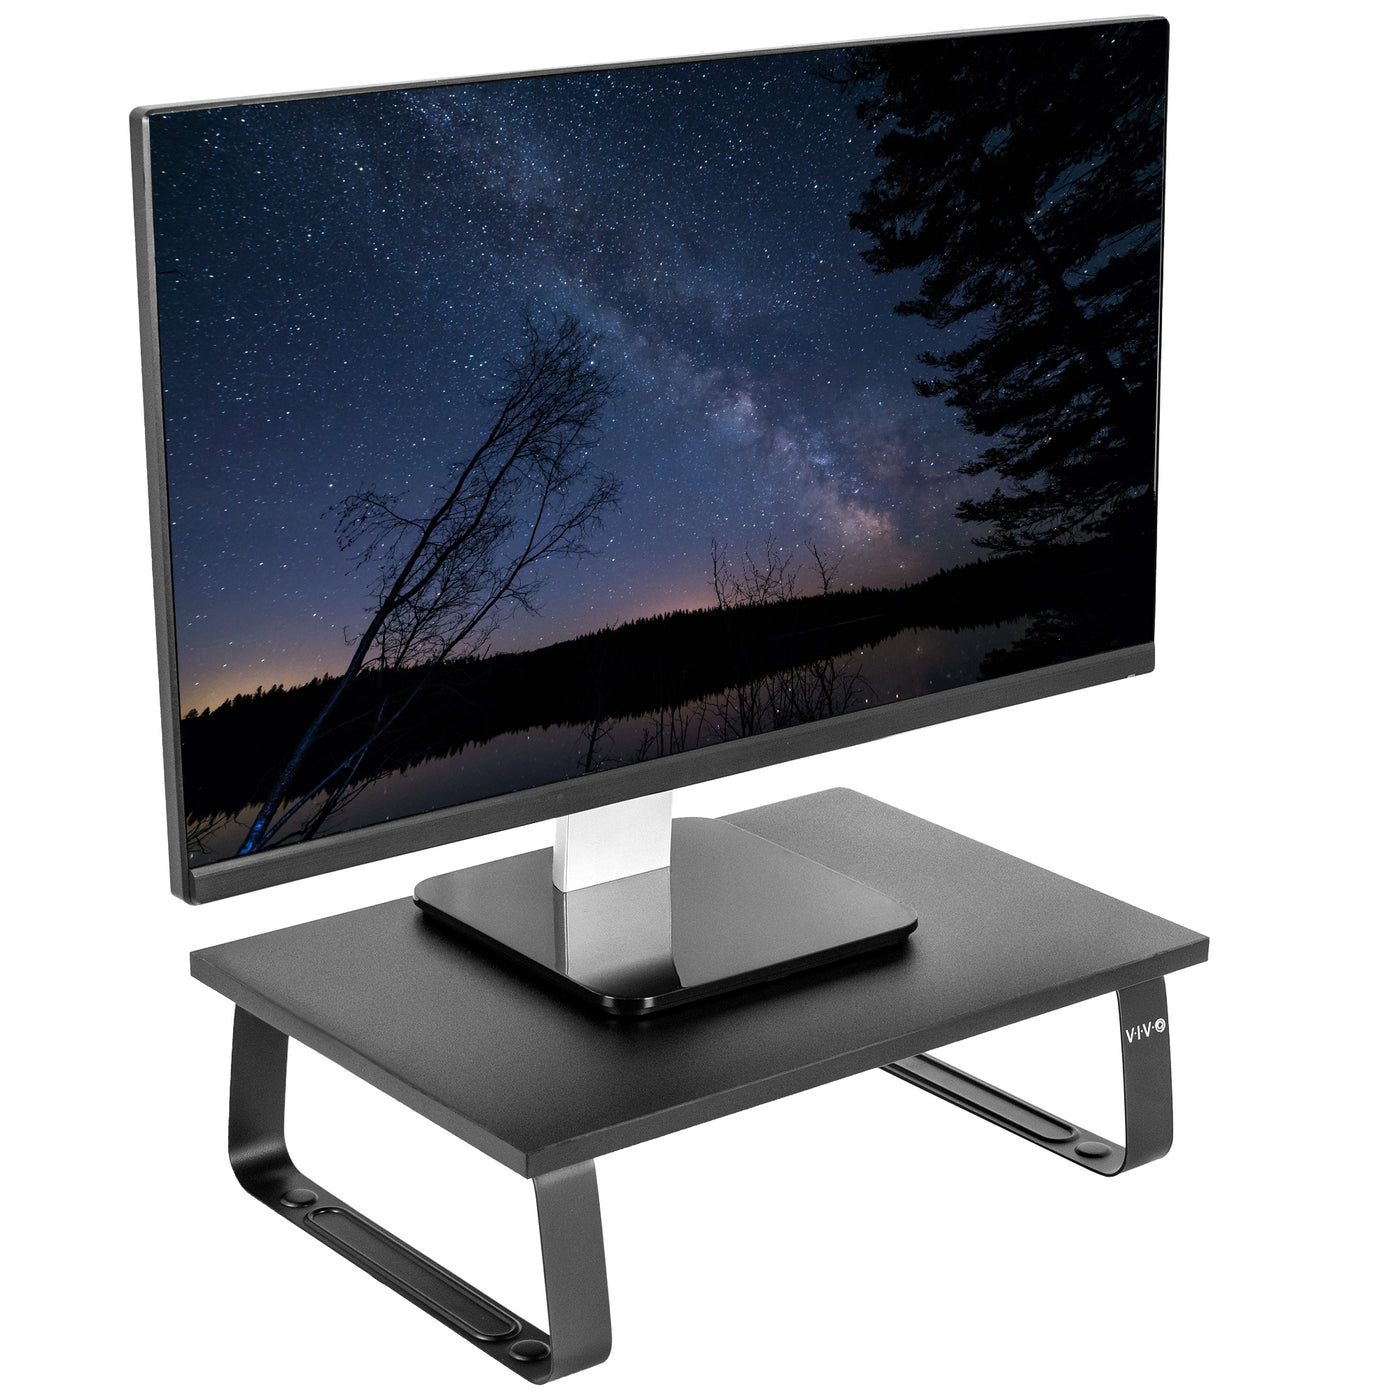 Sturdy tabletop riser for laptop or monitor for comfortable viewing.